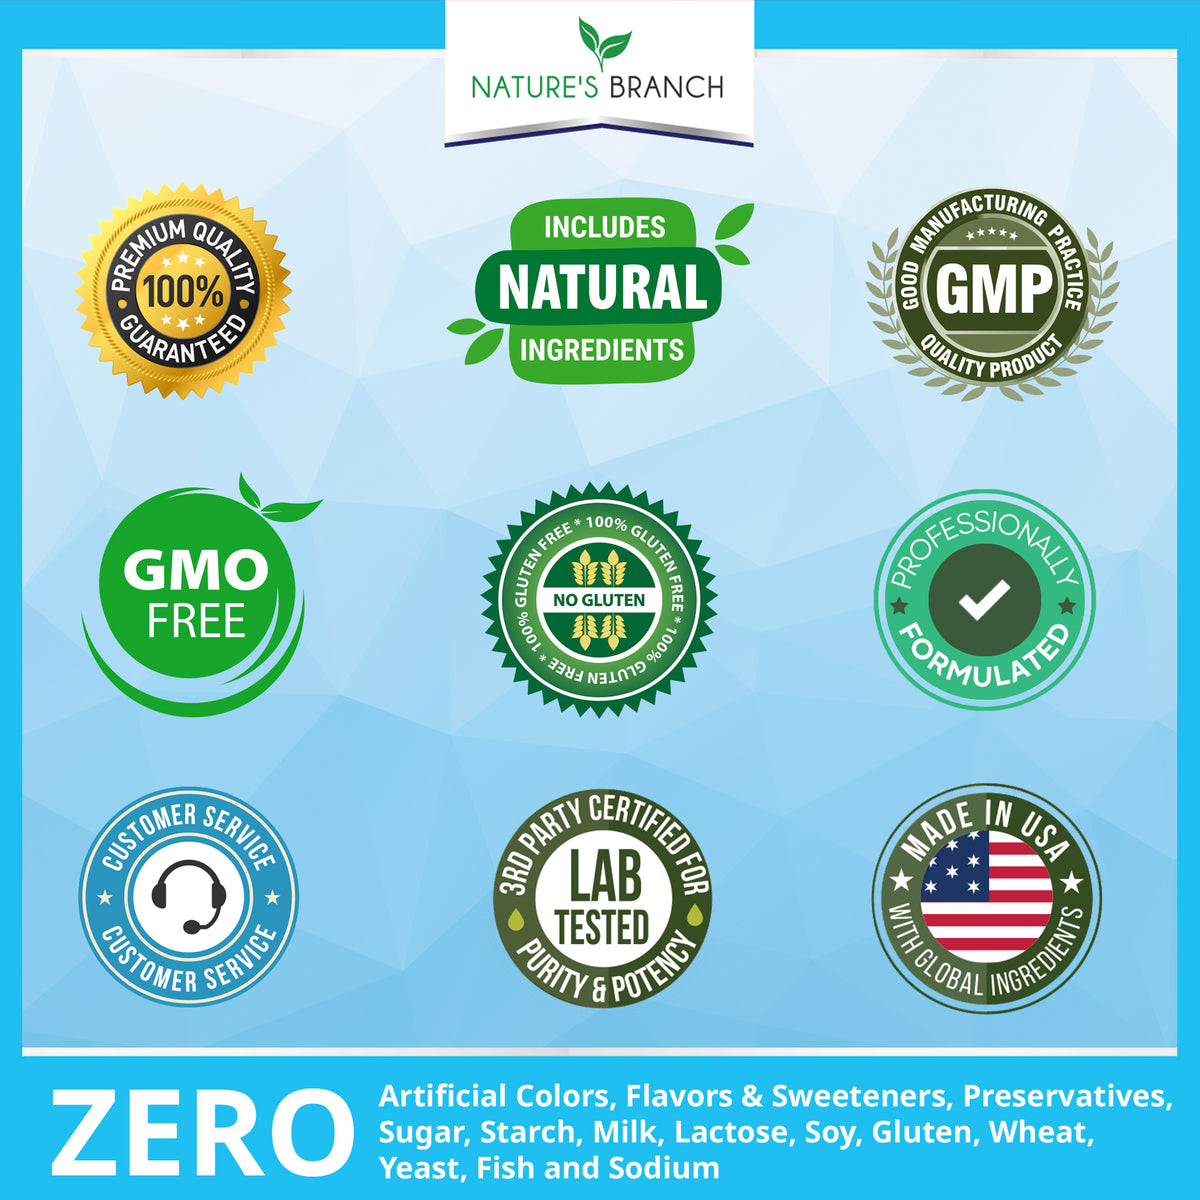 Infographic showing Nature&#39;s Branch certifications such as Made in USA and third party tested